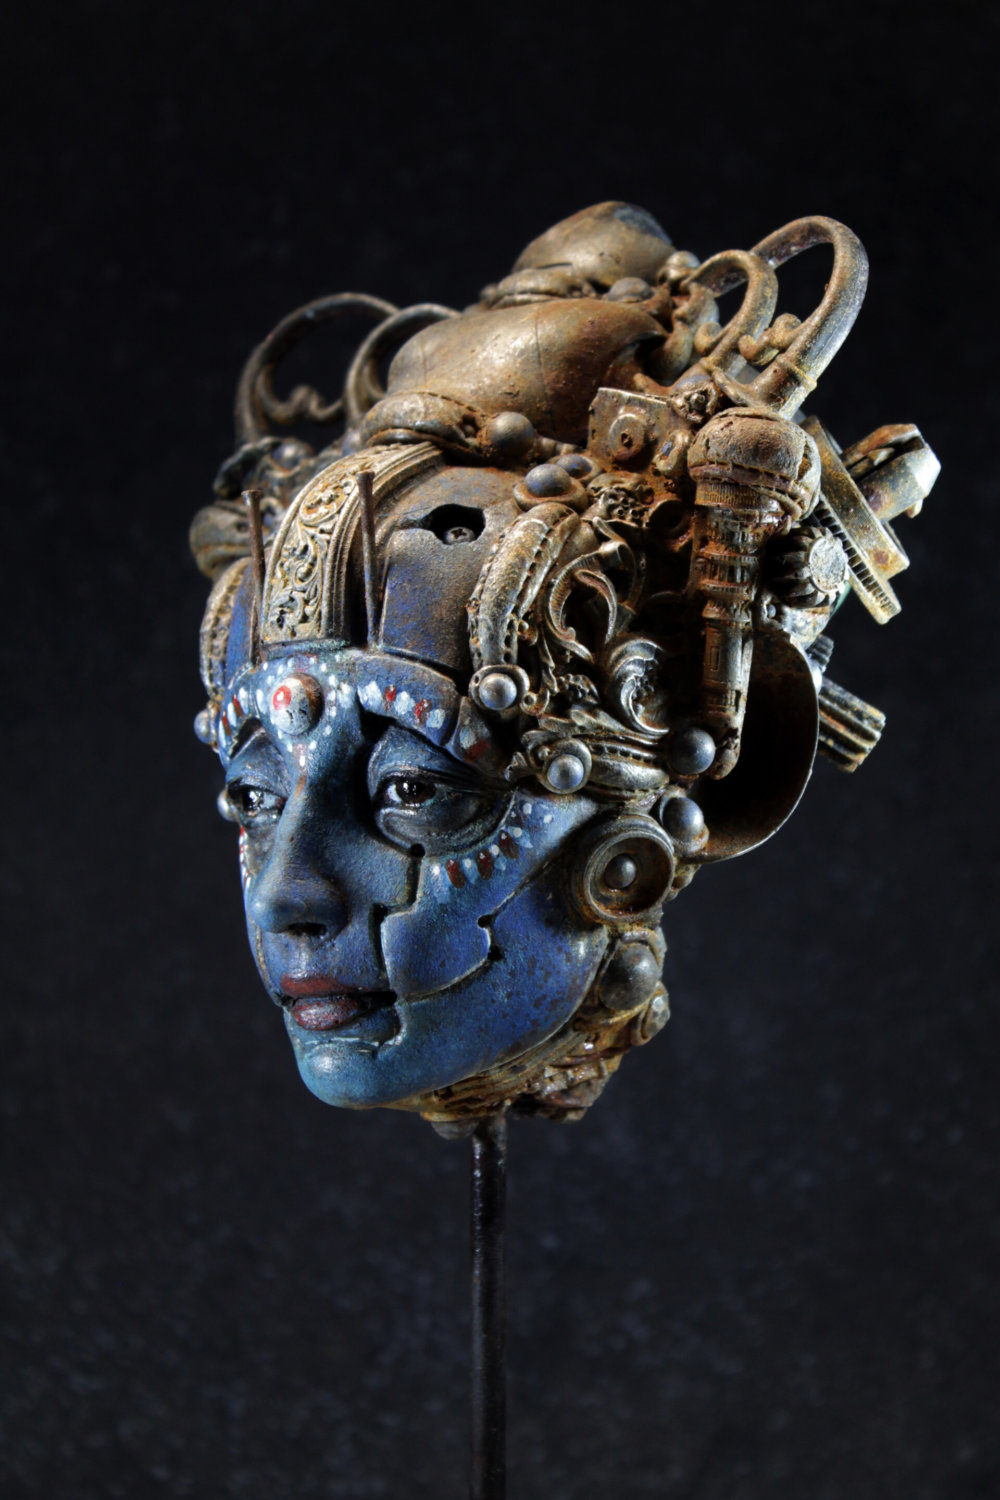 Relics Of The Future Futuristic Steampunk Resin Sculptures By Tomas Barcelo 14